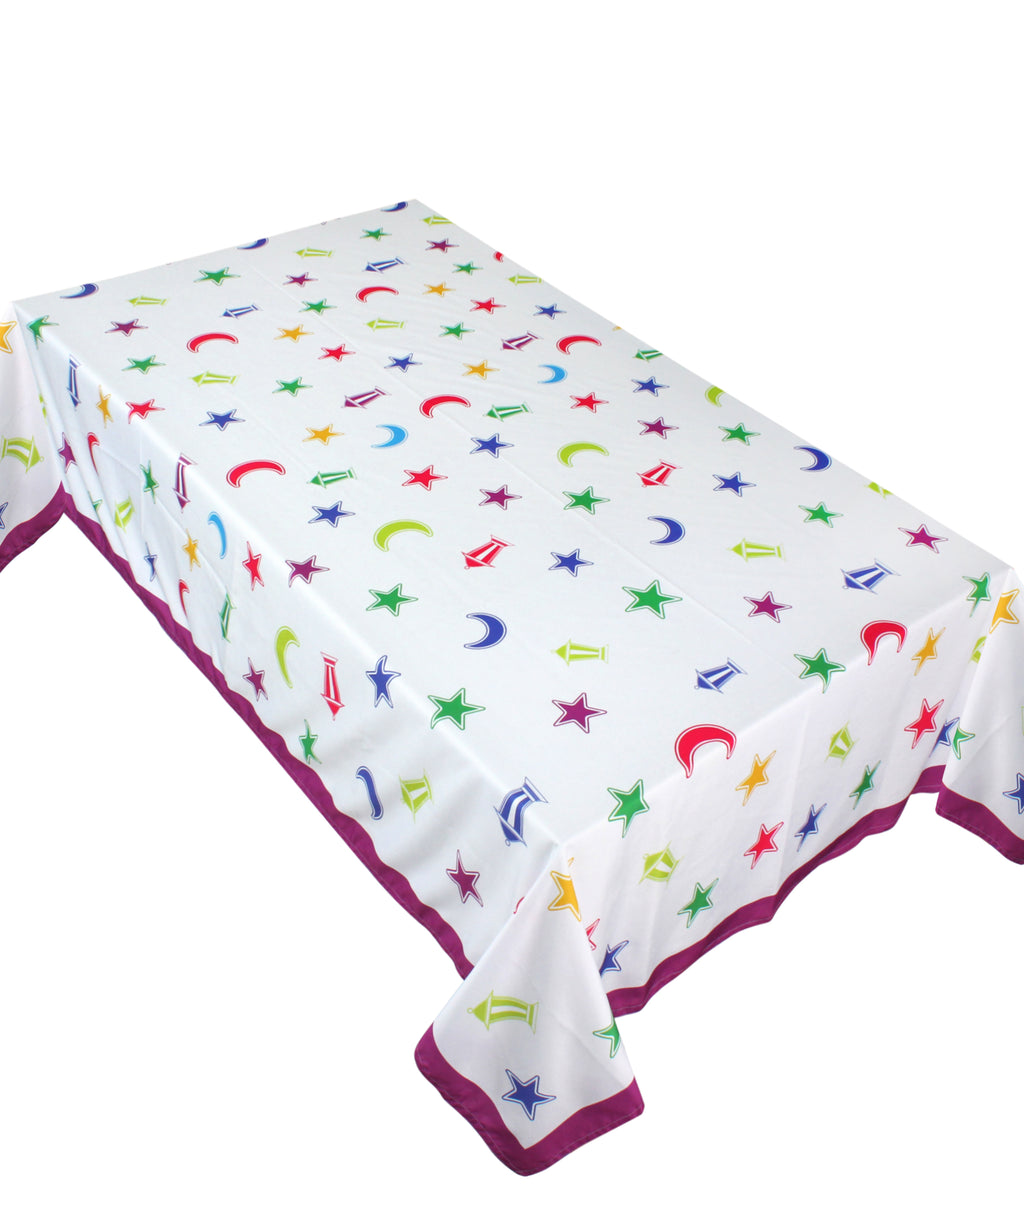 The colourful Ramadan icons table cover